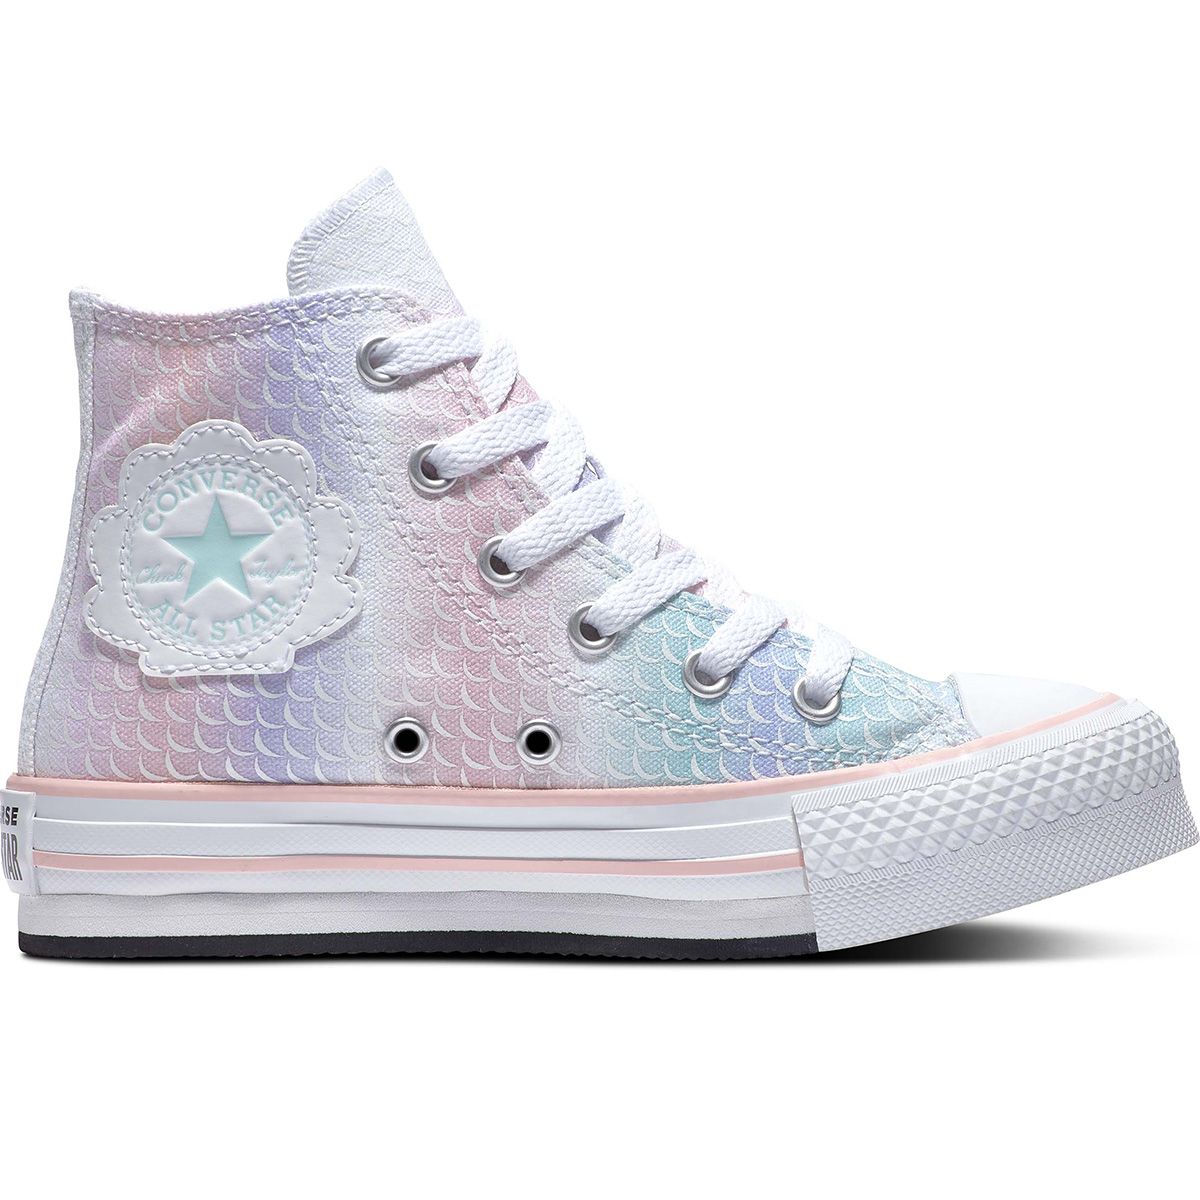 Converse Chuck Taylor All Star Lift Mermaid Scales Kids Shoe